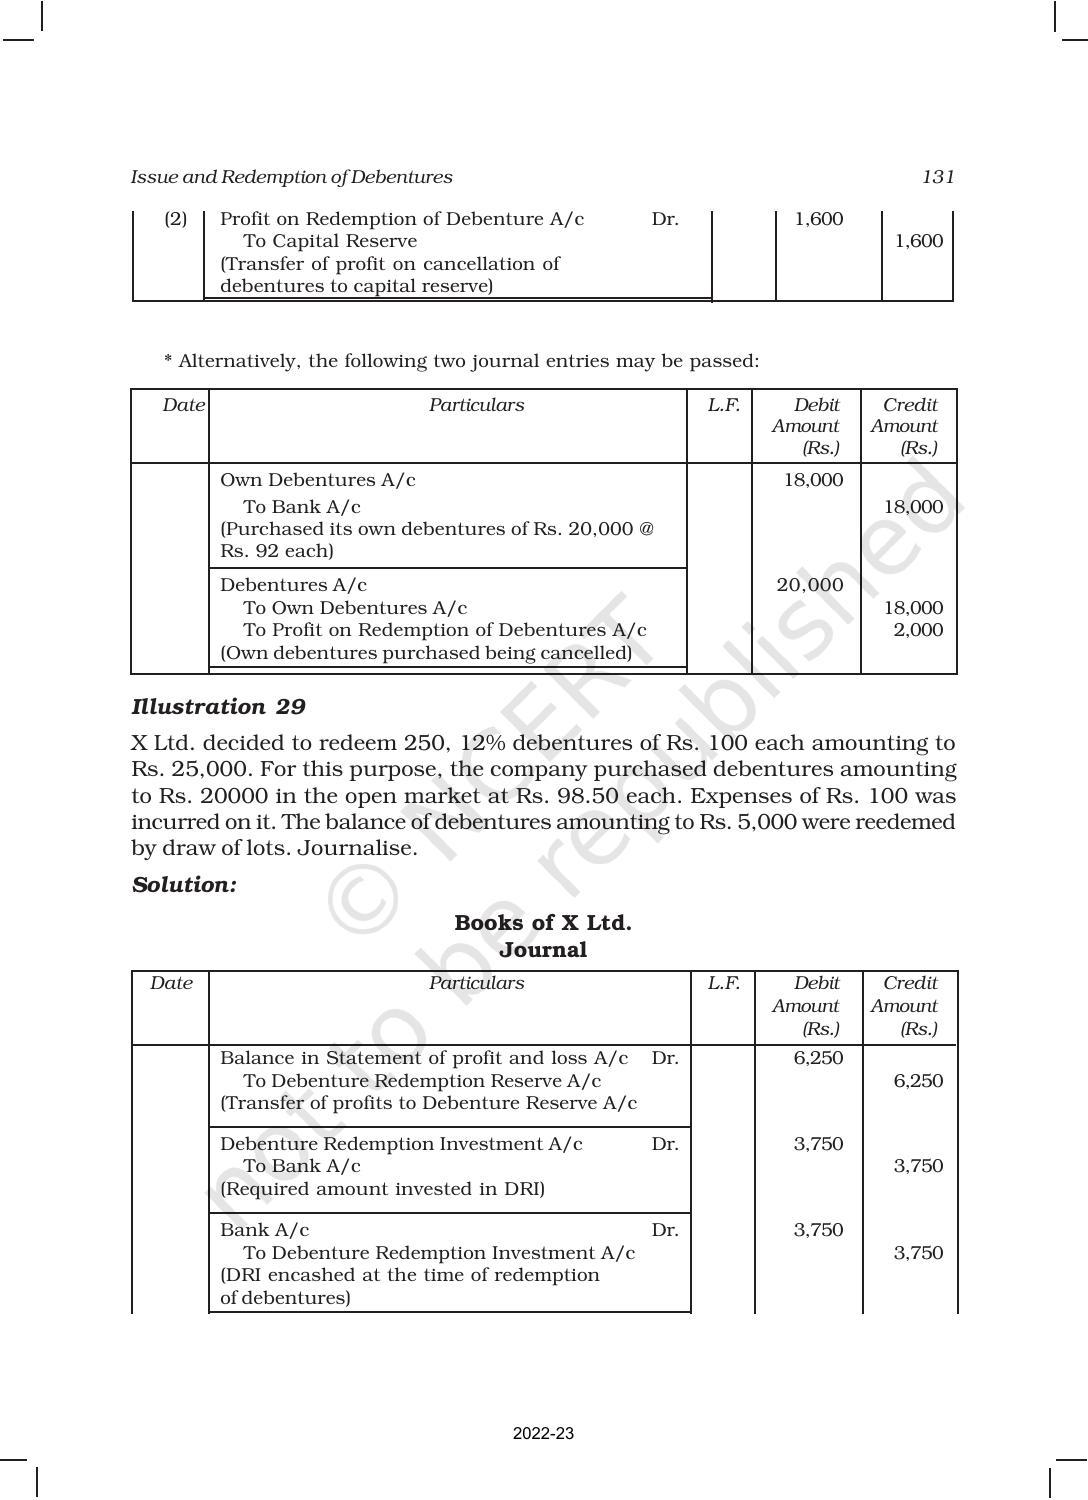 NCERT Book for Class 12 Accountancy Part II Chapter 1 Issue and Redemption of Debentures - Page 57